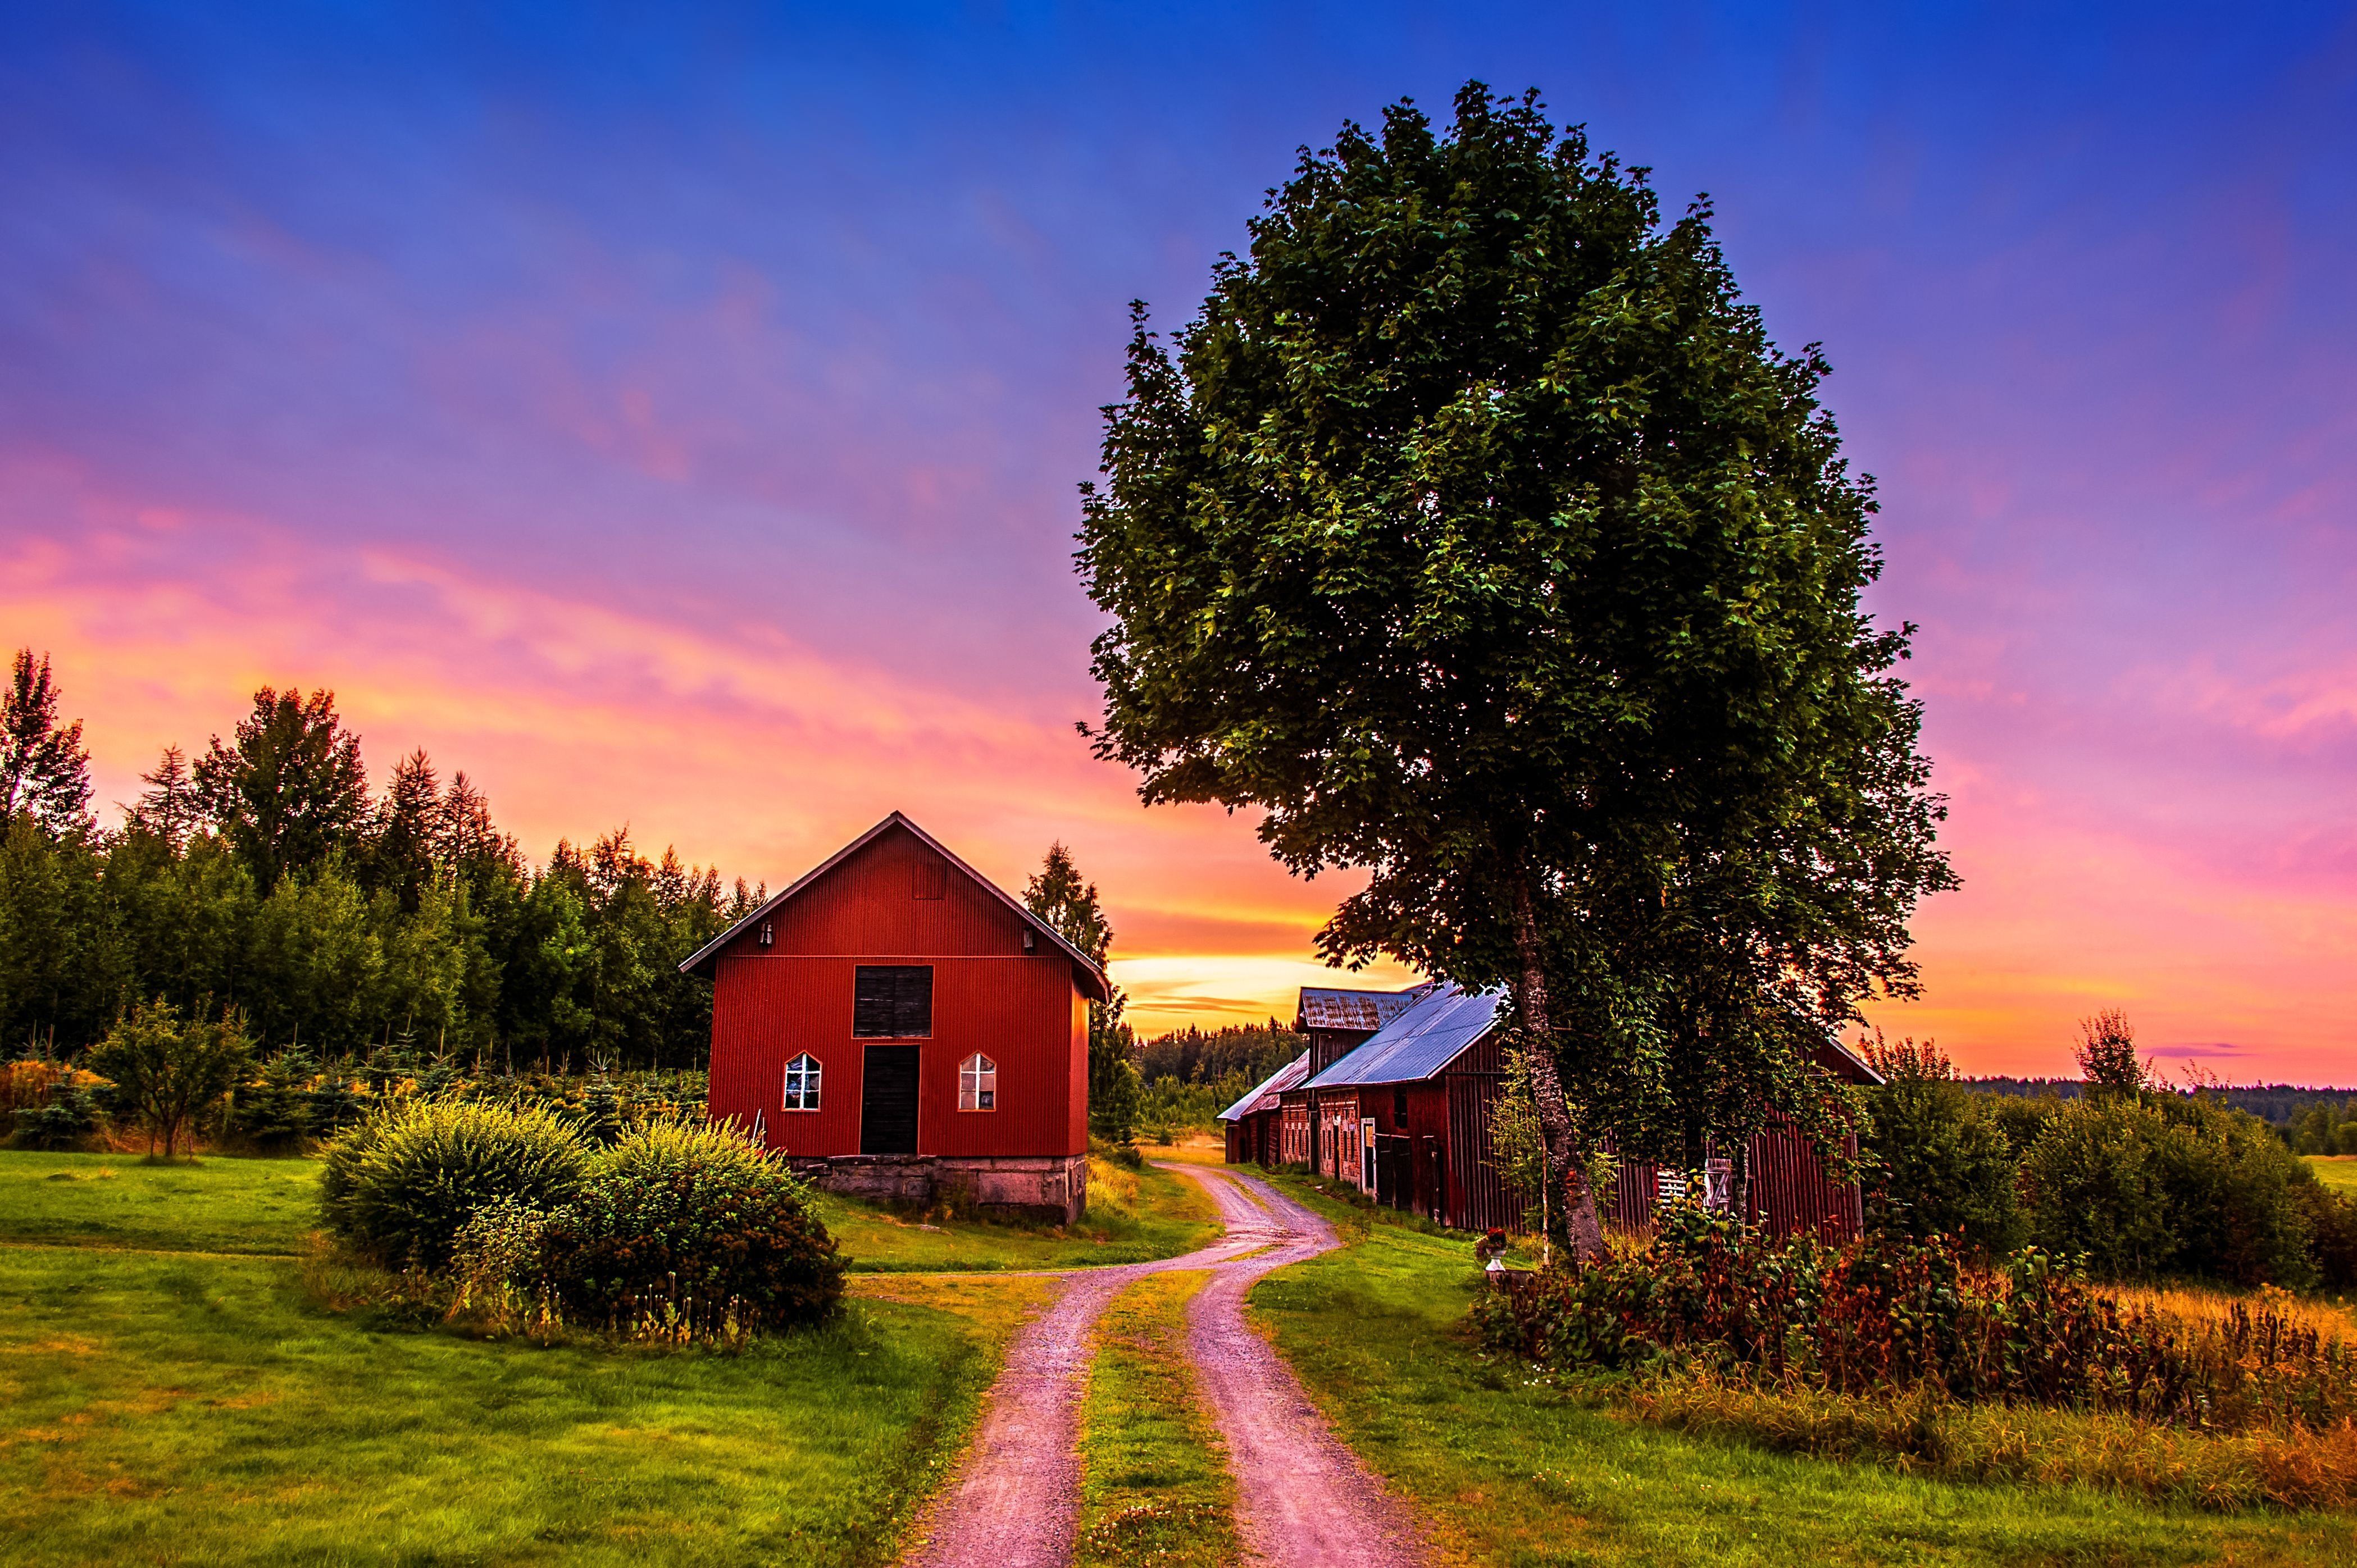 A dirt road leads to a red barn with a tree in front of it. - Farm